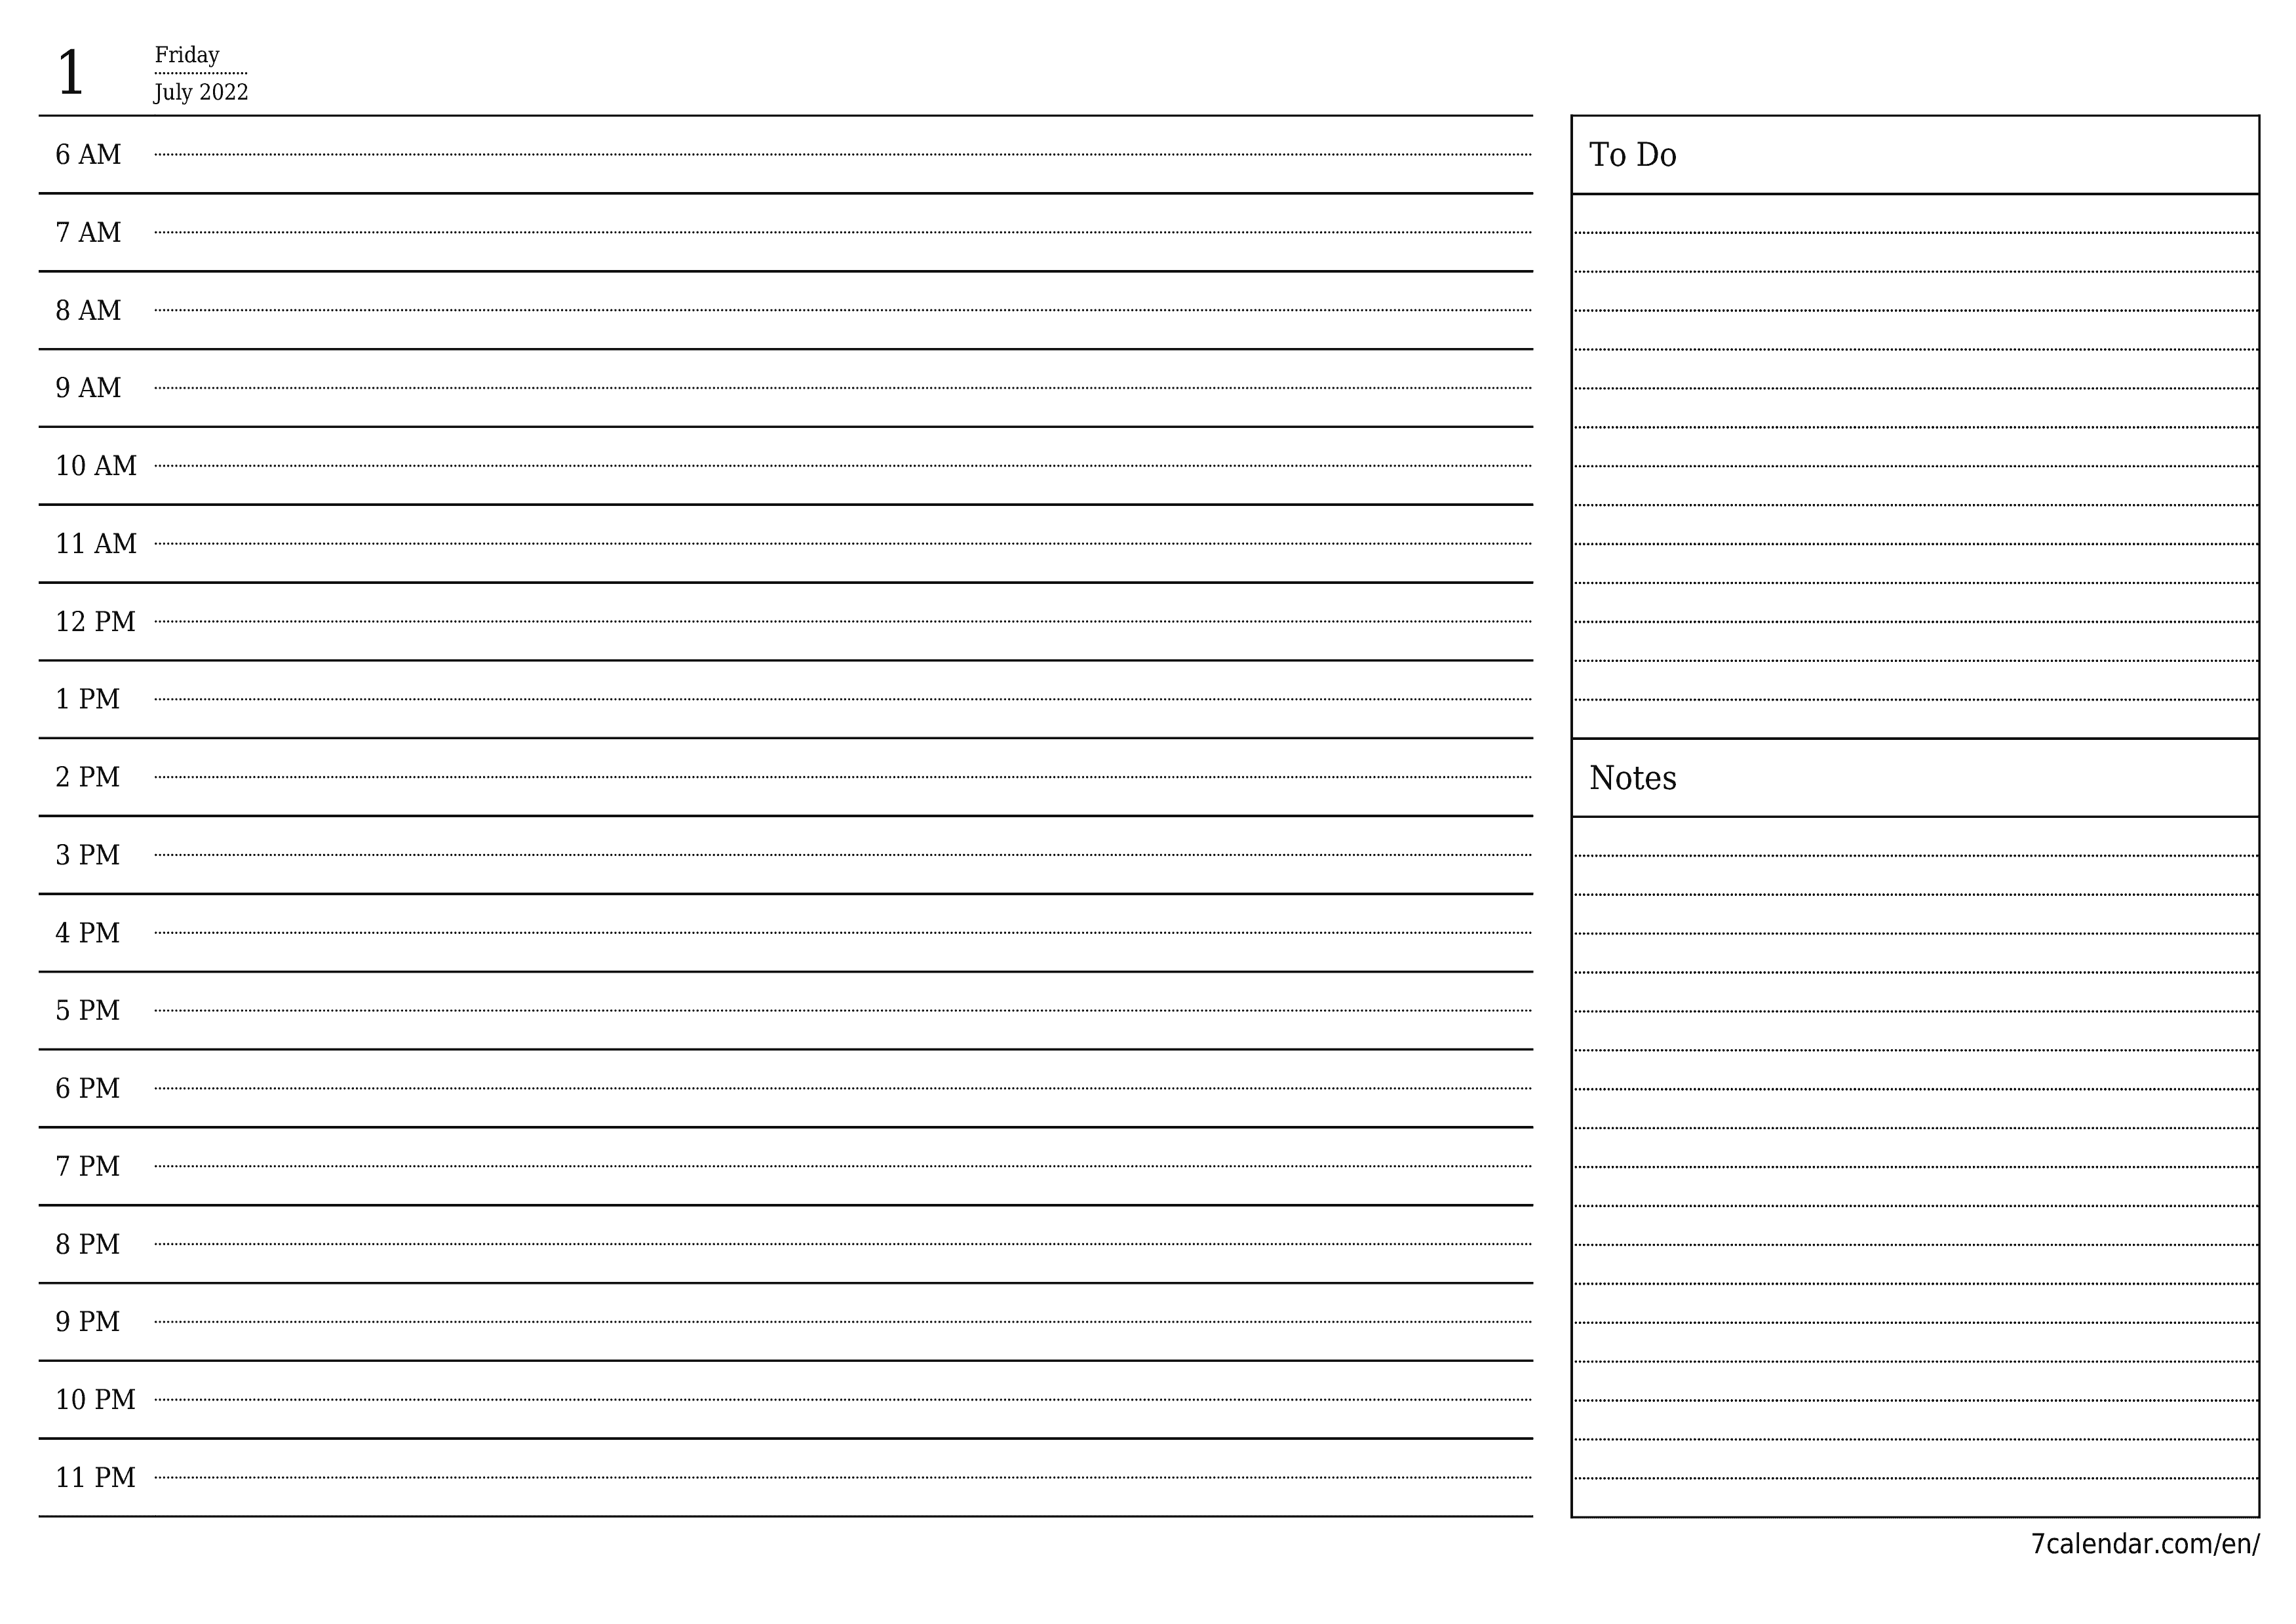 Blank daily calendar planner for day July 2022 with notes, save and print to PDF PNG English - 7calendar.com